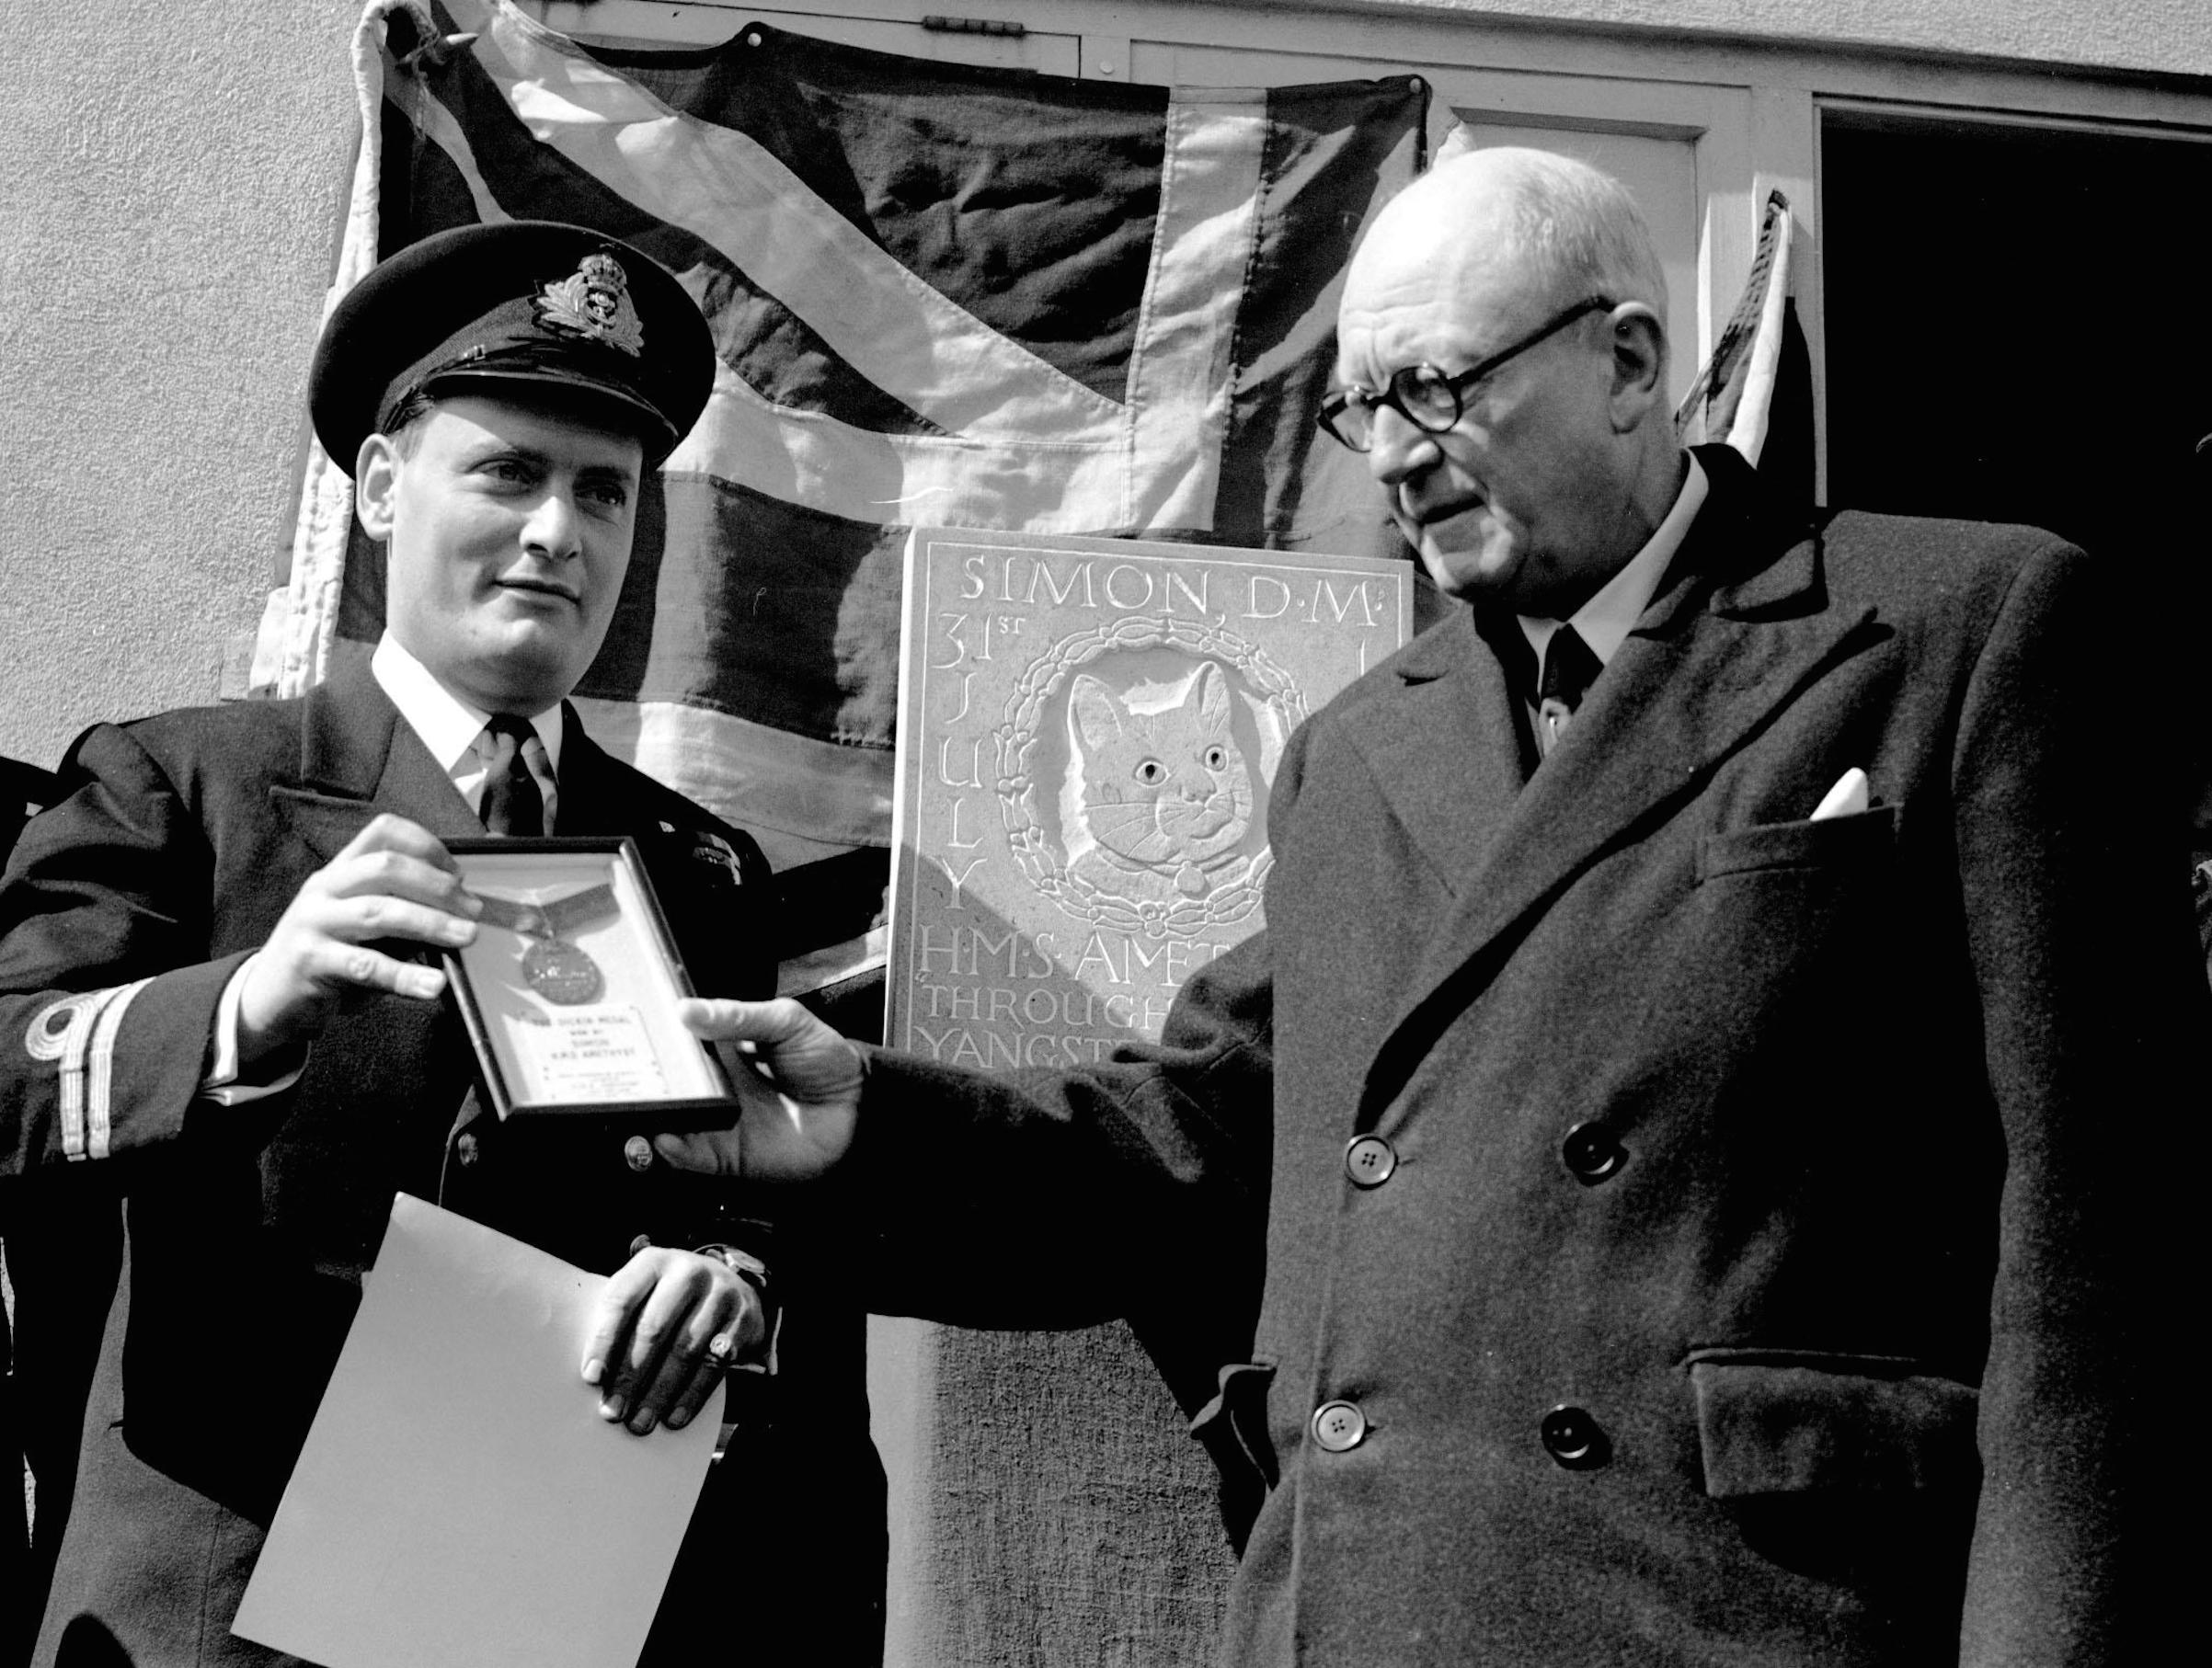 Alderman W. Harry Taylor with Lieutenant Geoffrey Weston (L) who assumed command of the frigate Amethyst, unveiling a plaque in memory of the ship's cat Simon, in Plymouth, after the cat received the Dickin Medal, for catching rats and protecting food supplies during the time the ship was trapped by the Chinese (PA Images / Getty Images)